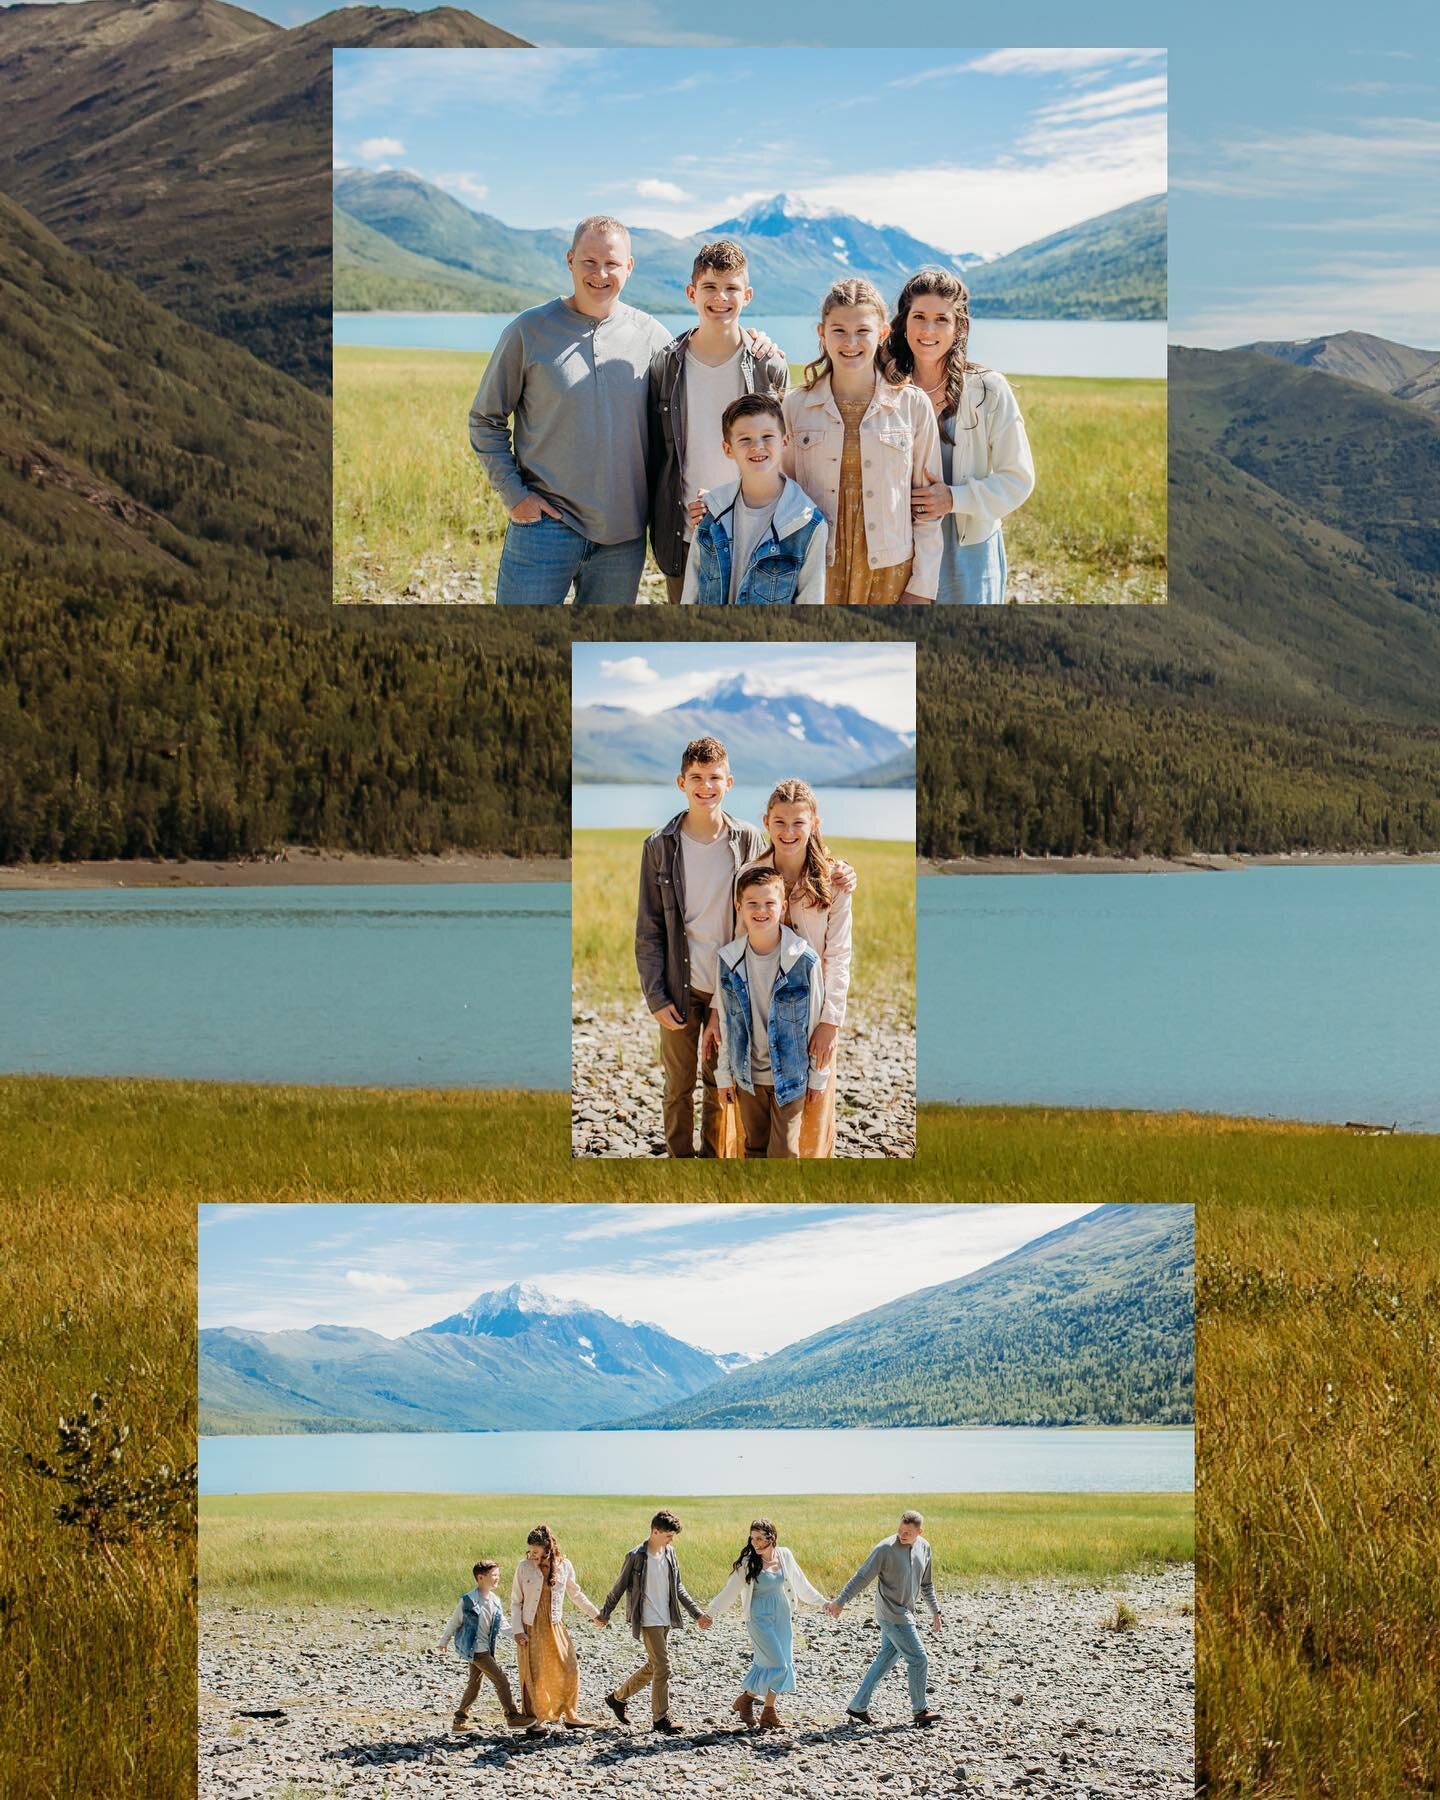 here&rsquo;s a dash of sunshine from this sweet family, the kemps 💛

#anchoragealaska #familyphotographer #jberphotographer #farewellsession #smal01 #anchoragephotographer #fortleevaphotographer #richmondphotographer #petersburgvaphotographer #richm